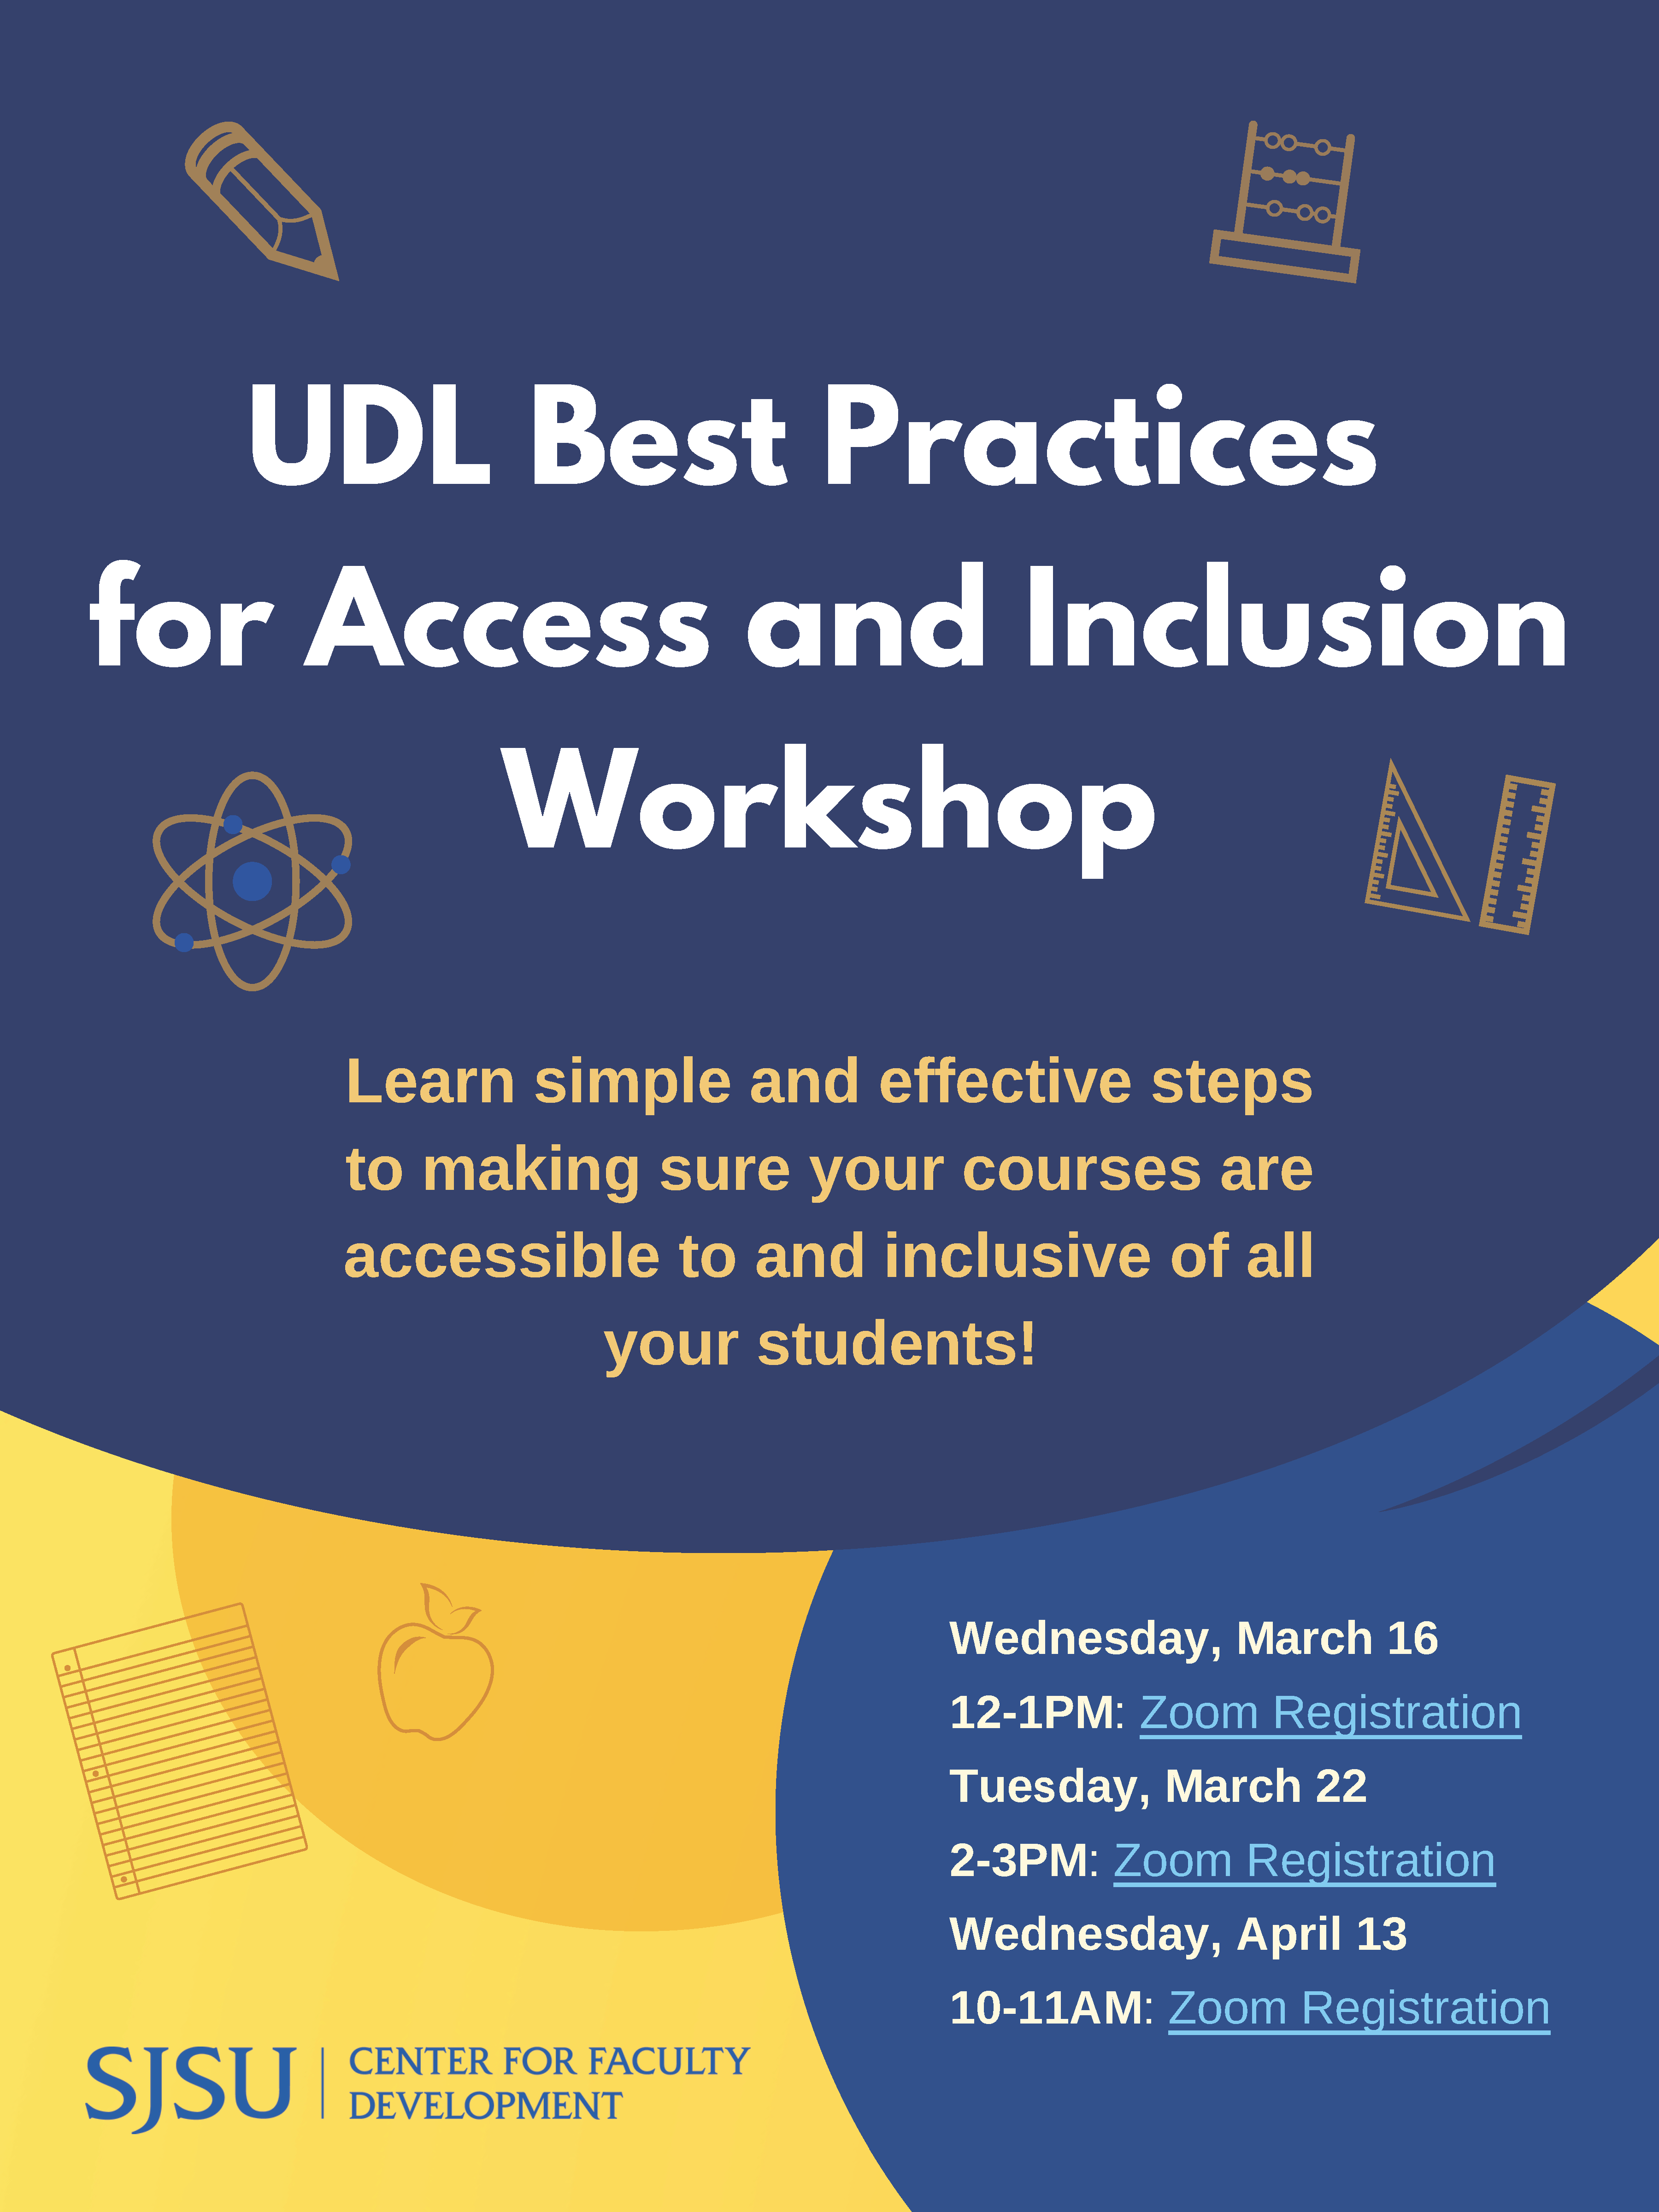 CFD UDL Access and Inclusion Workshop Flyer.png